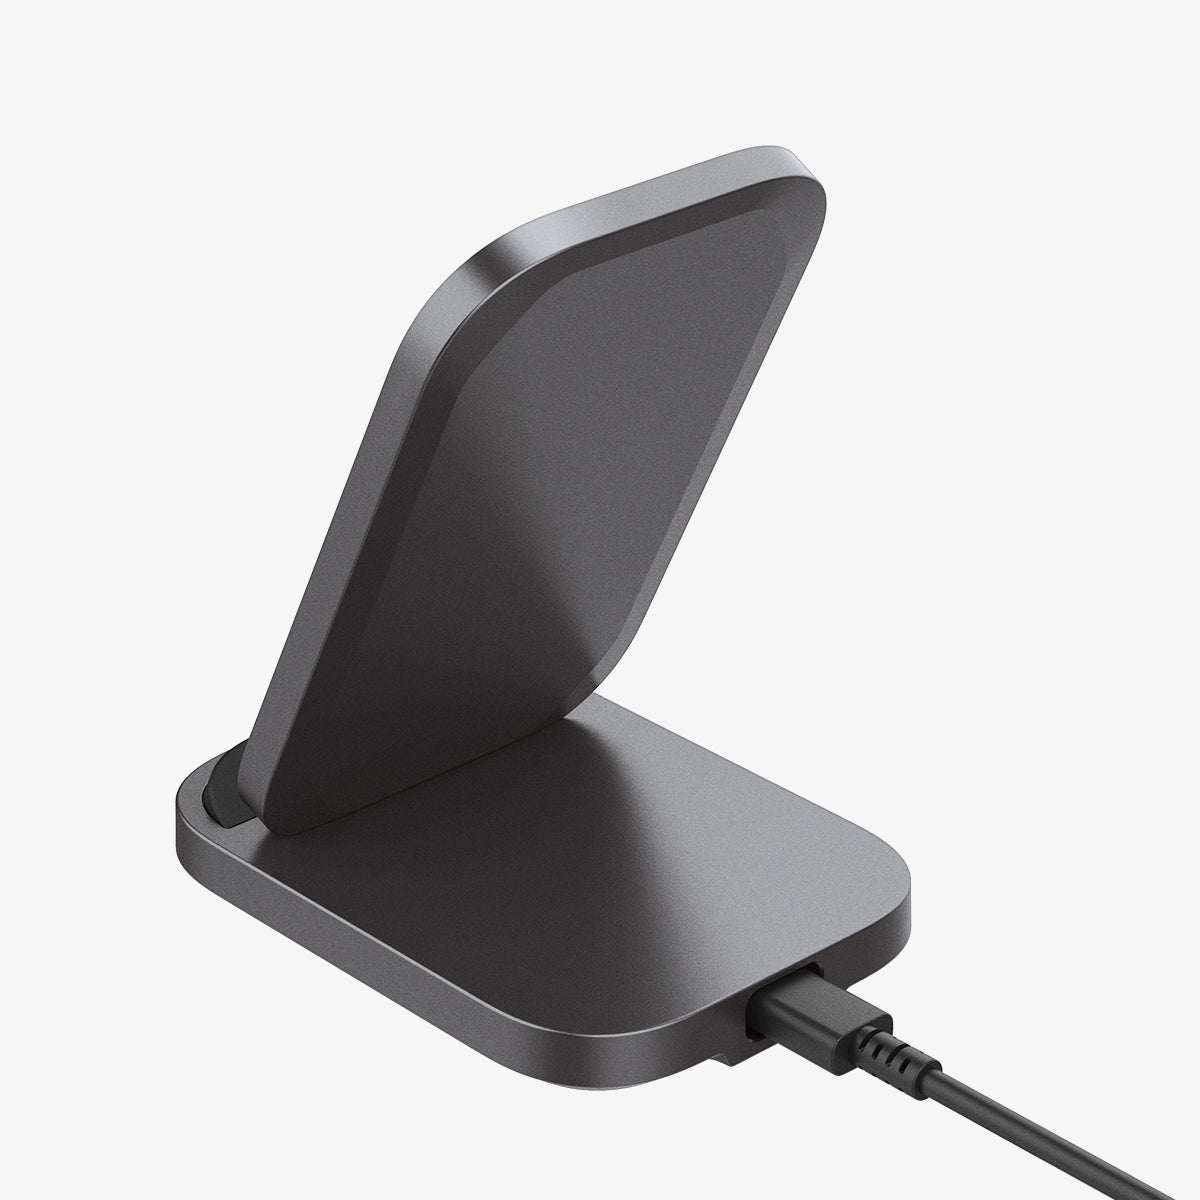 ACH06254 - ArcField PF2102 Wireless Charger in black showing the back and side